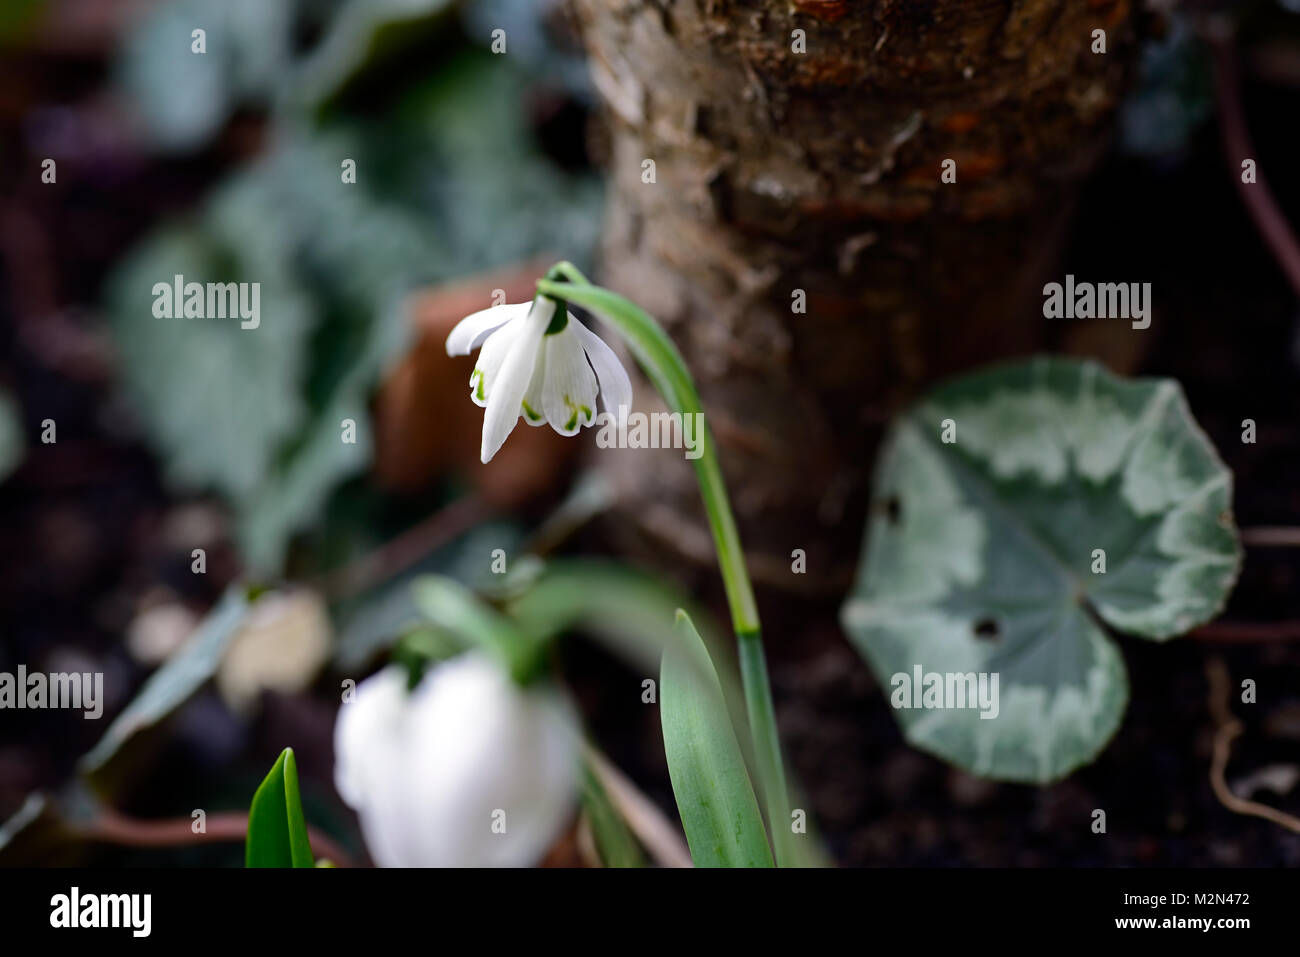 Galanthus lady beatrix stanley, double,snowdrop,white,flowers,green markings,flower,snowdrops,spring,flowering,bloom,double flower,double flowers,RM F Stock Photo